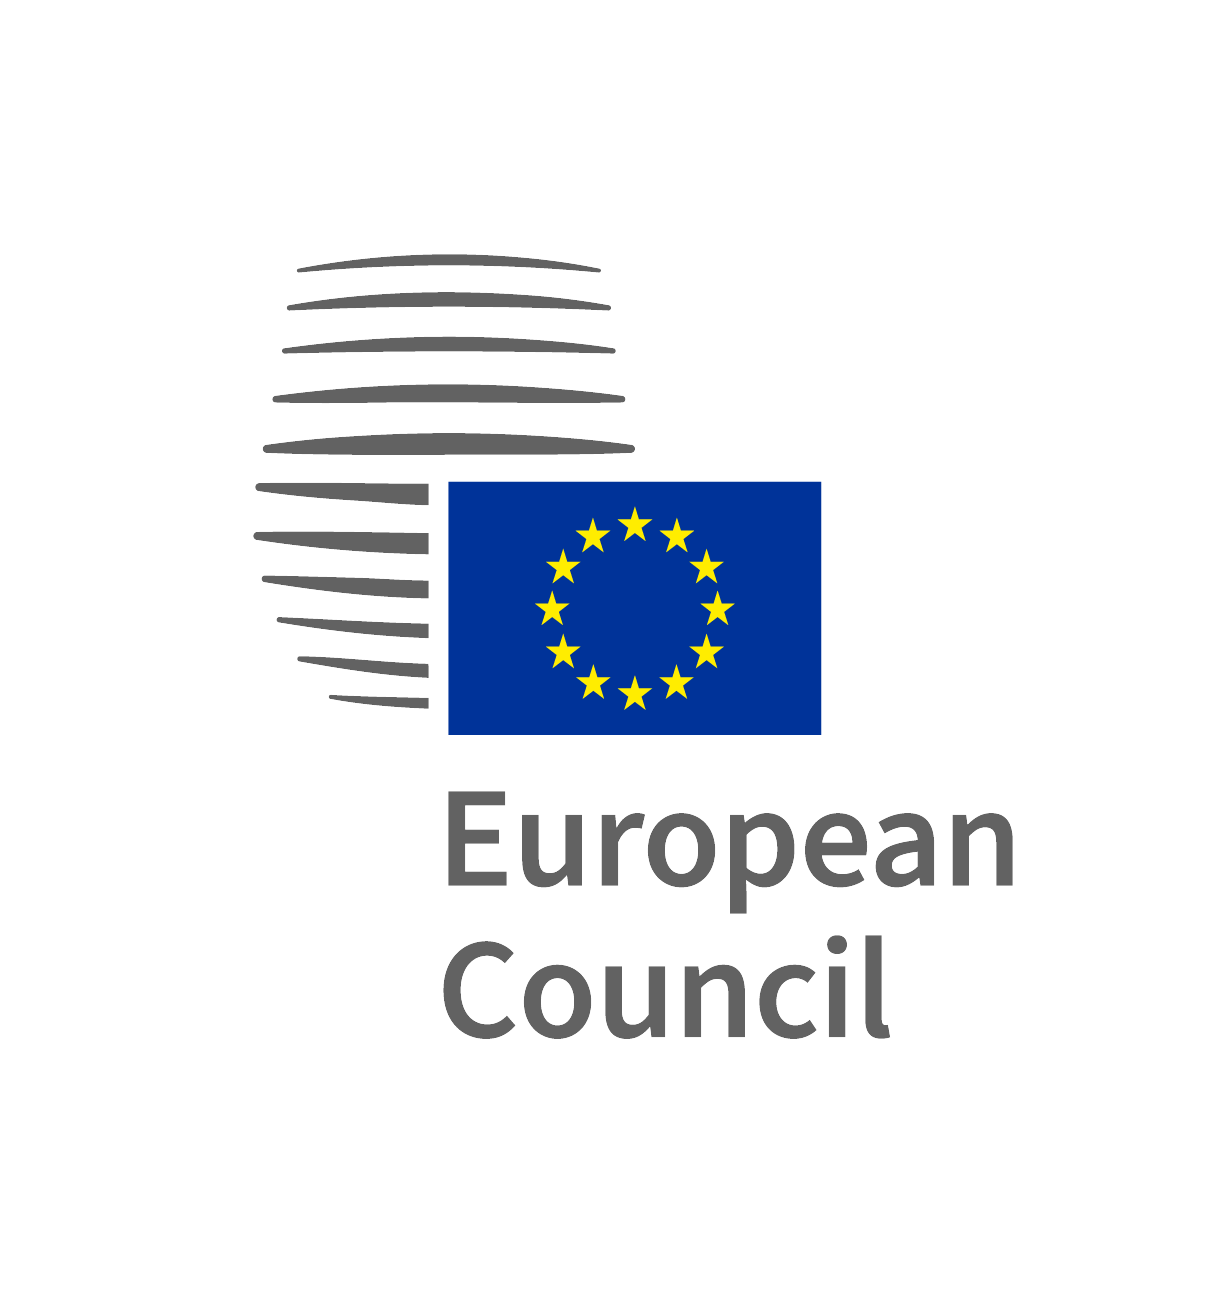 The image shows the logo of the European Council